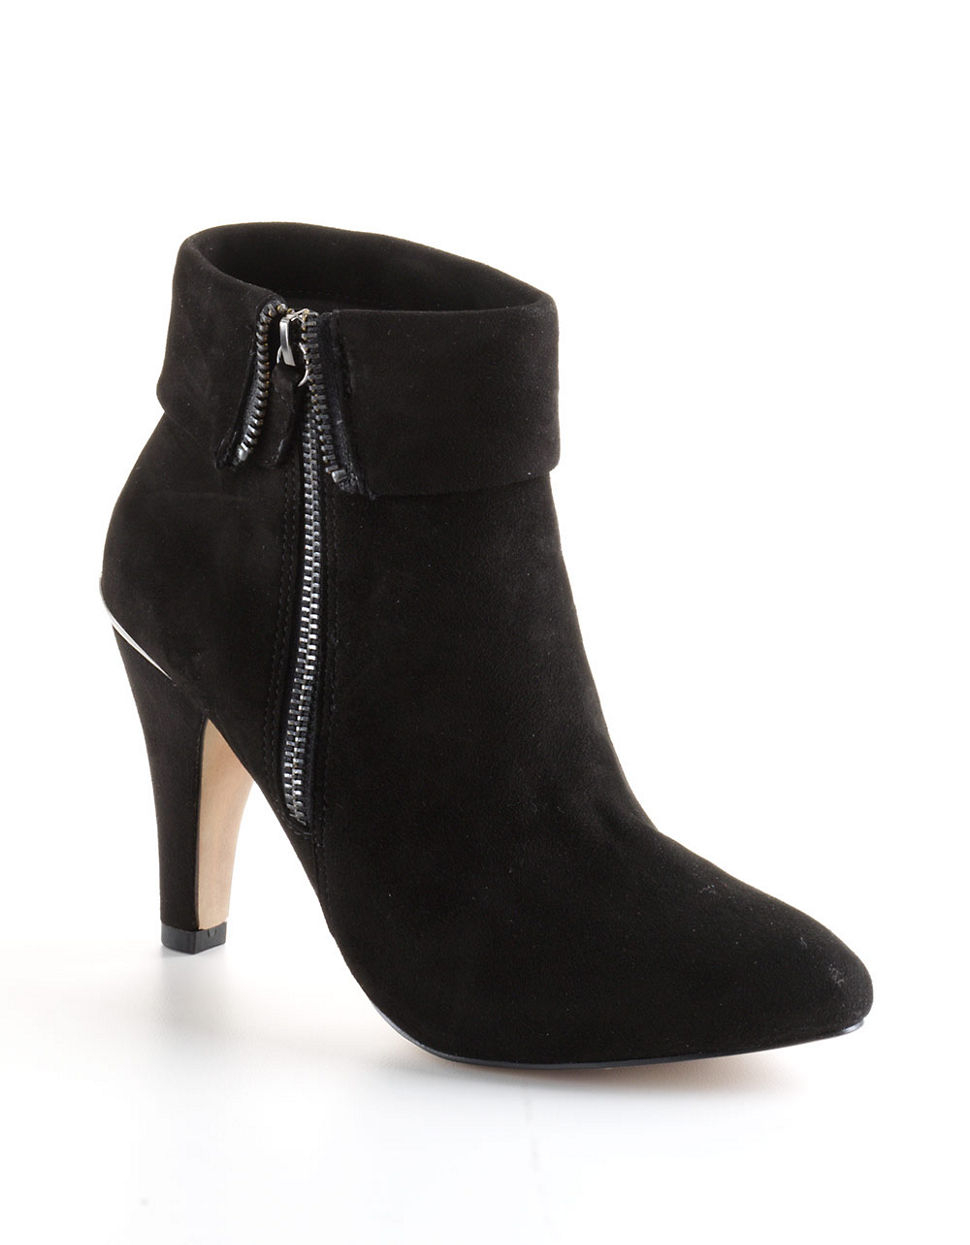 Lyst - Adrienne Vittadini Sedona Suede Ankle Boots in Black